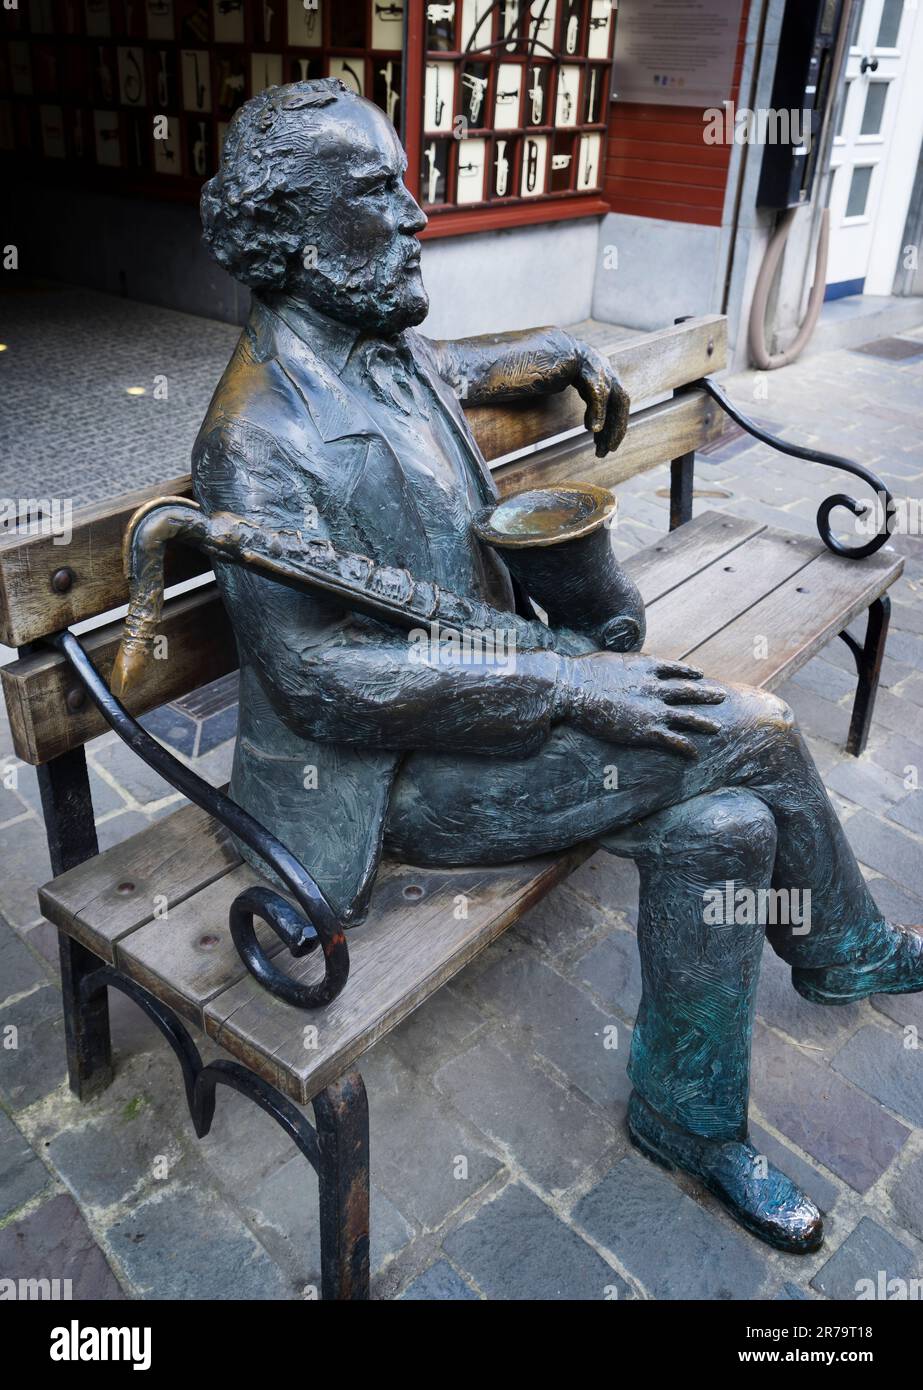 Statue of Adolphe Sax, inventor of the saxophone and other musical instruments, in the Belgian city of Dinant, his hometown. Stock Photo